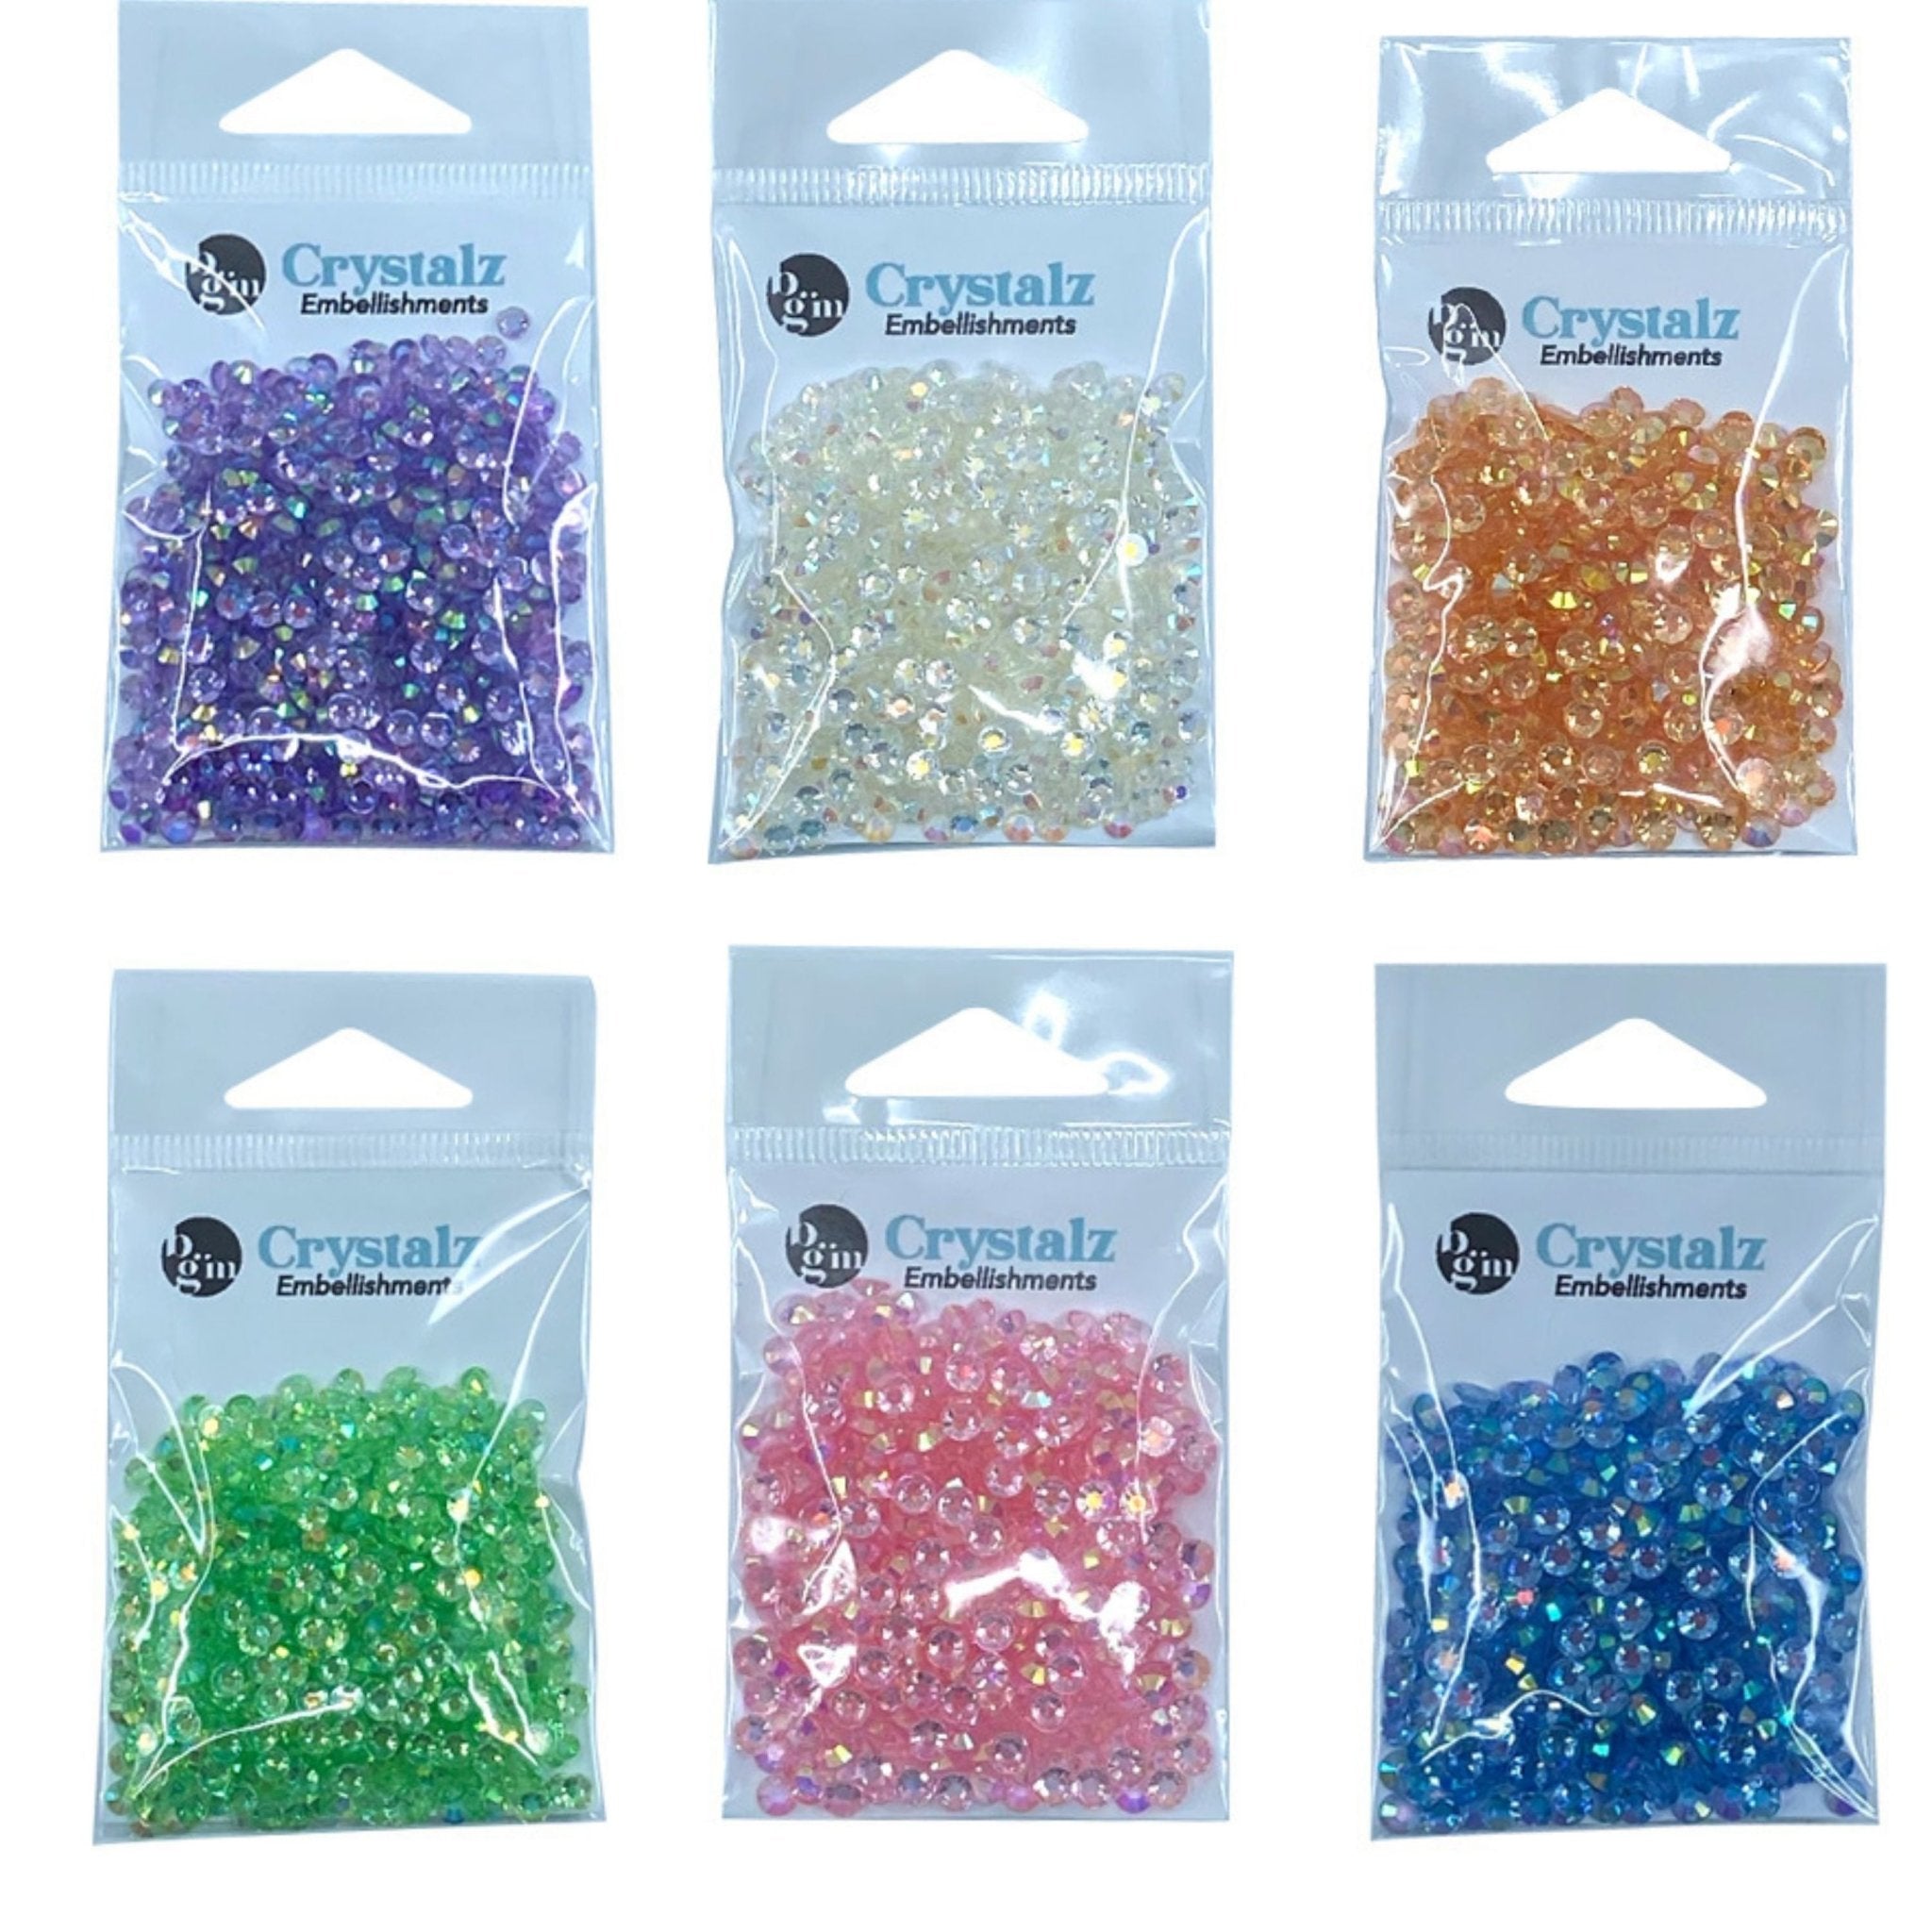 Buttons Galore Crystalz Iridescent Flat Back Gems for DIY Crafts, Scrapbooks, Paper Crafts - Soft Colors 2400 Pieces - Buttons Galore and More